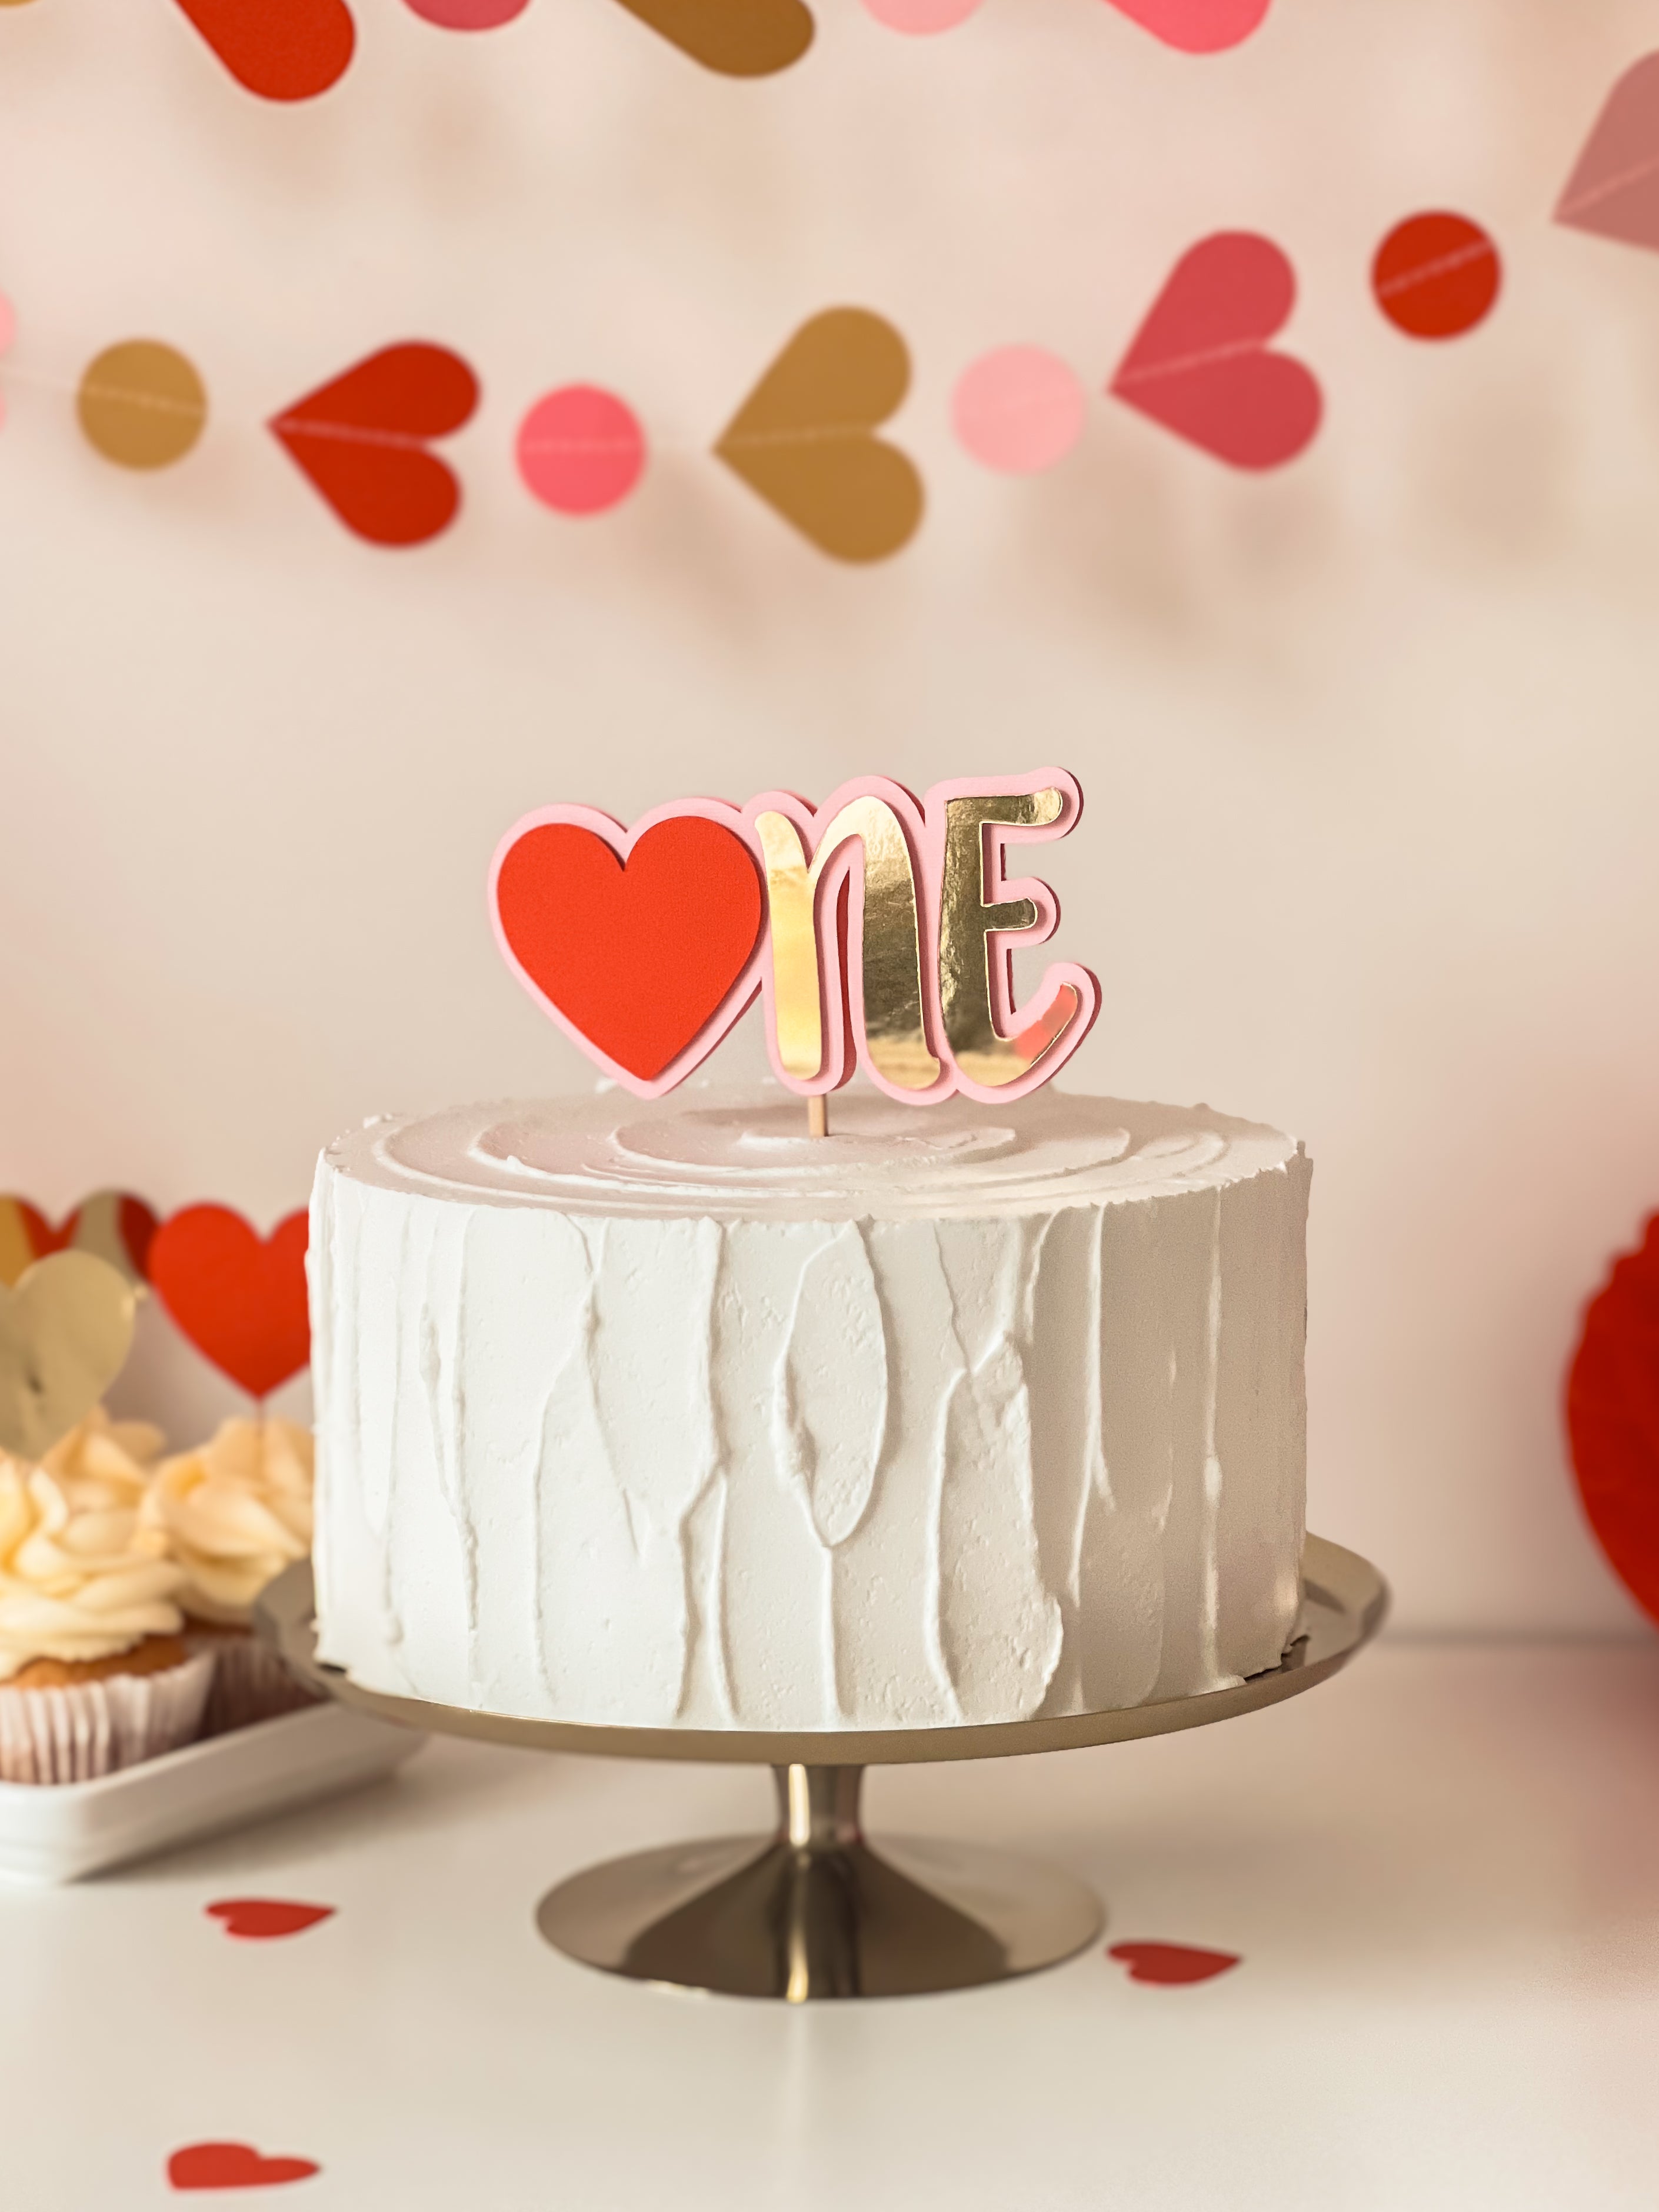 Valentines Day Birthday Decorations,Our little Sweetheart First Birthd –  Iconica Design